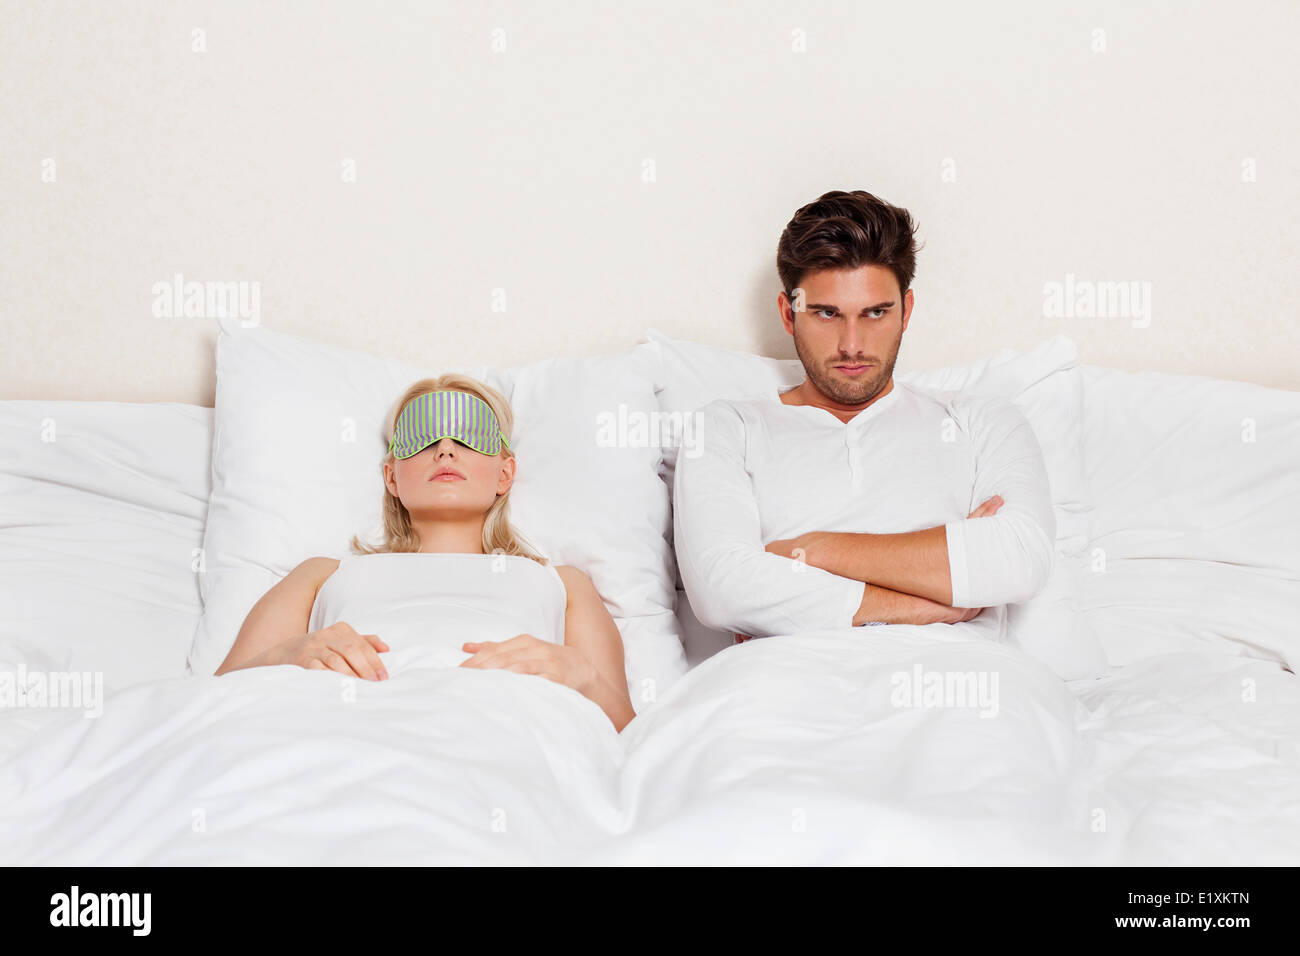 Displeased young man with woman sleeping in bed Stock Photo